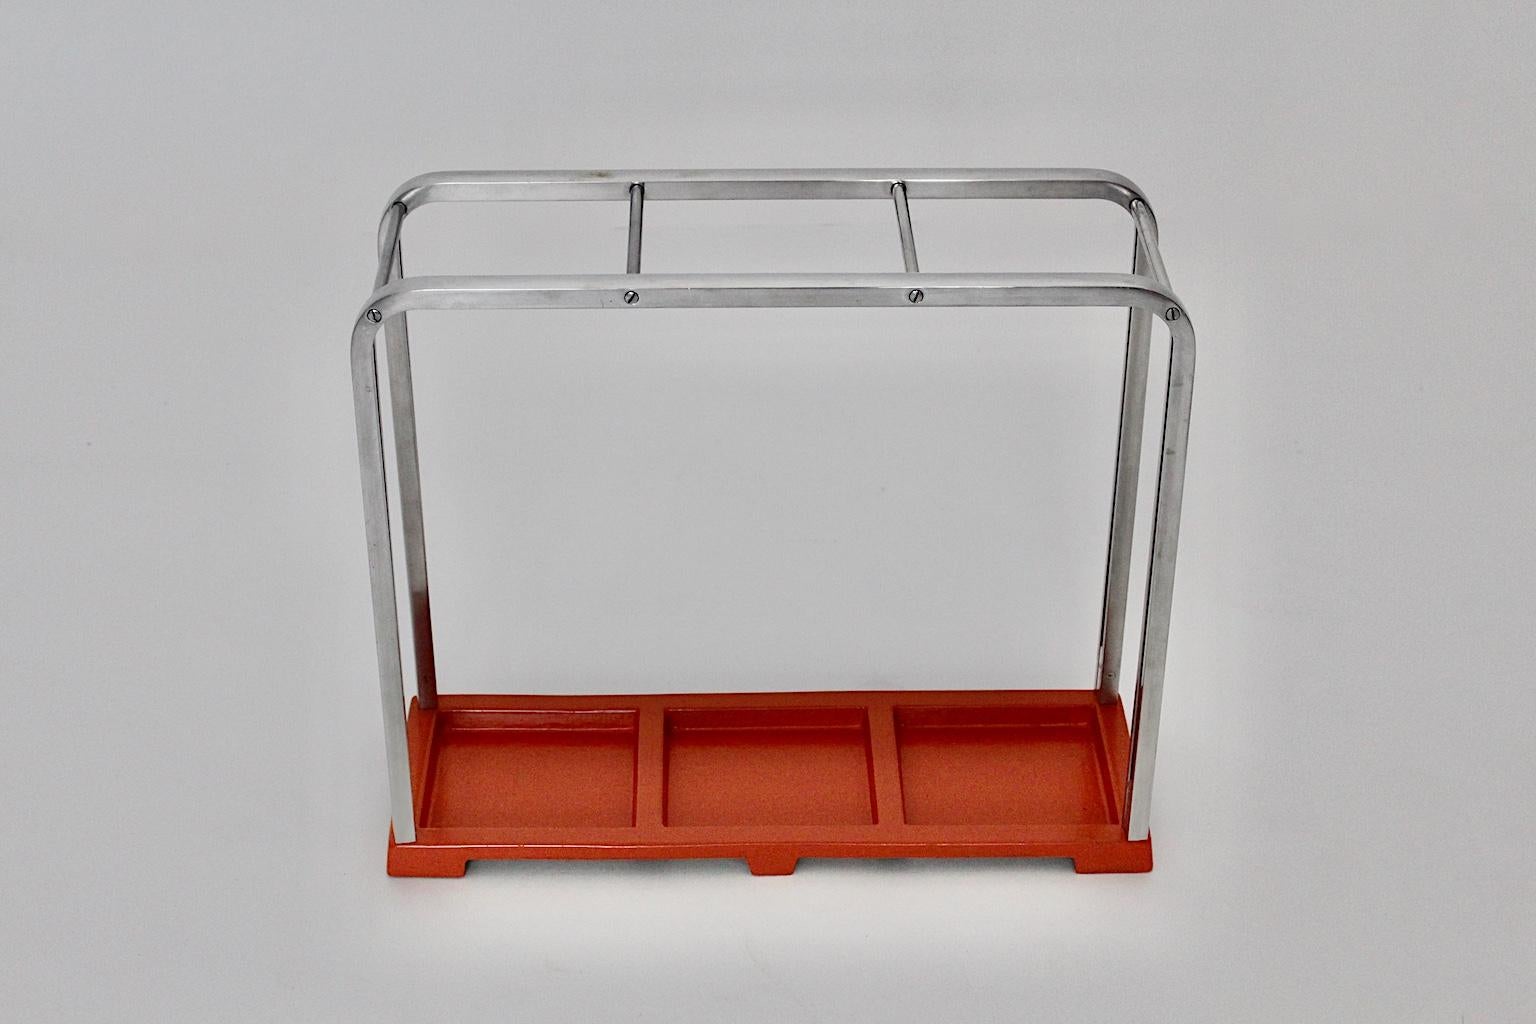 Bauhaus Art Deco Vintage Red Silver Aluminum Umbrella Stand, 1930s, Germany For Sale 5